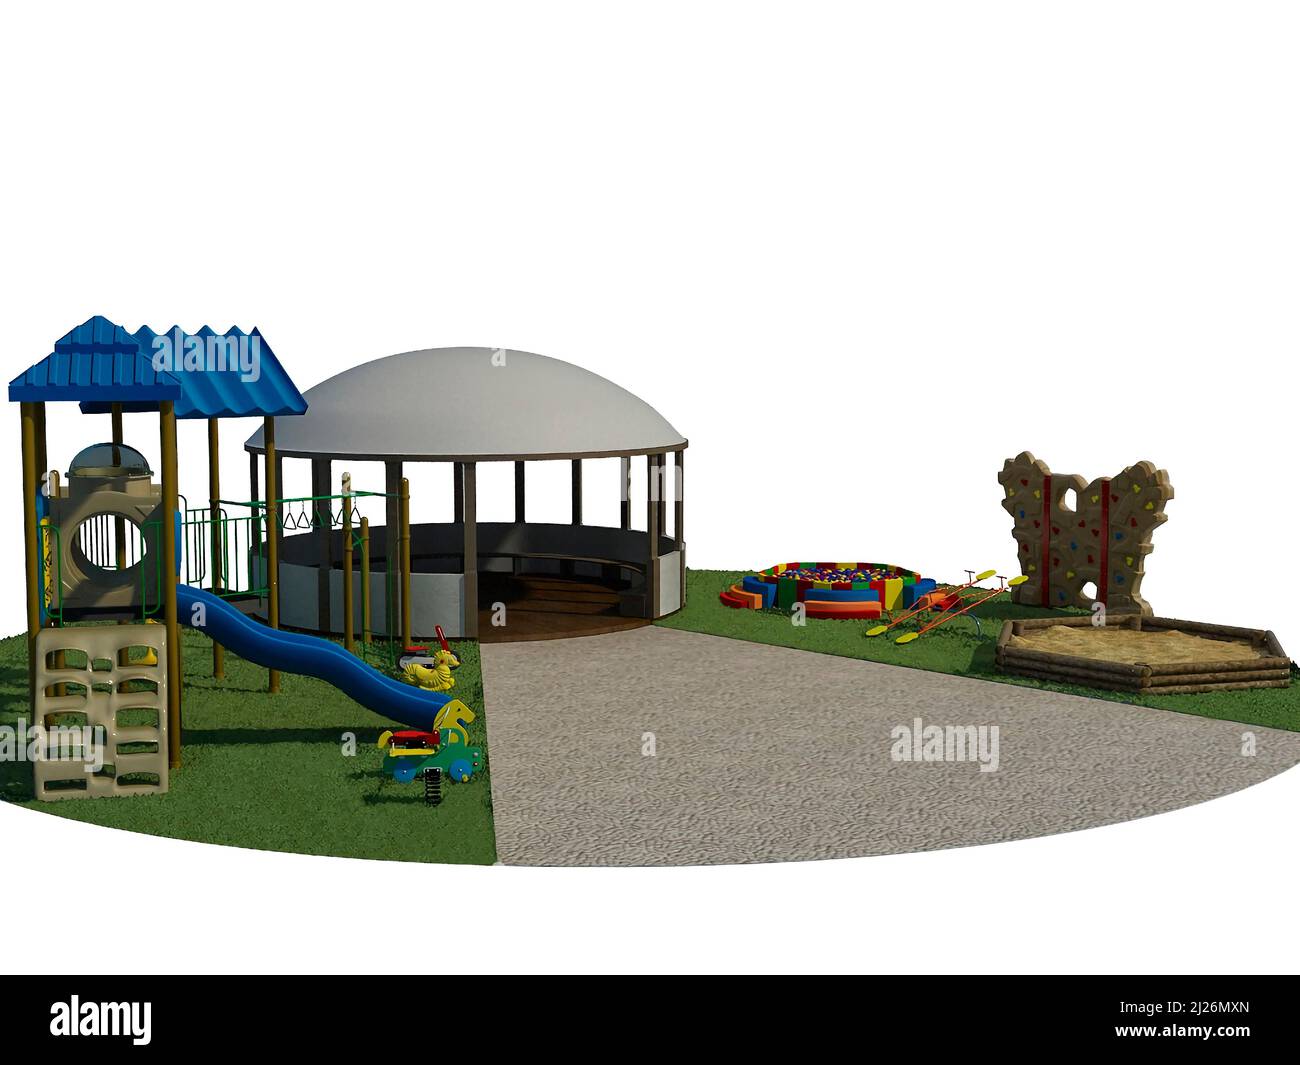 3d render of a design concept for a children's playground. 3d illustration. Isolated image on white background Stock Photo